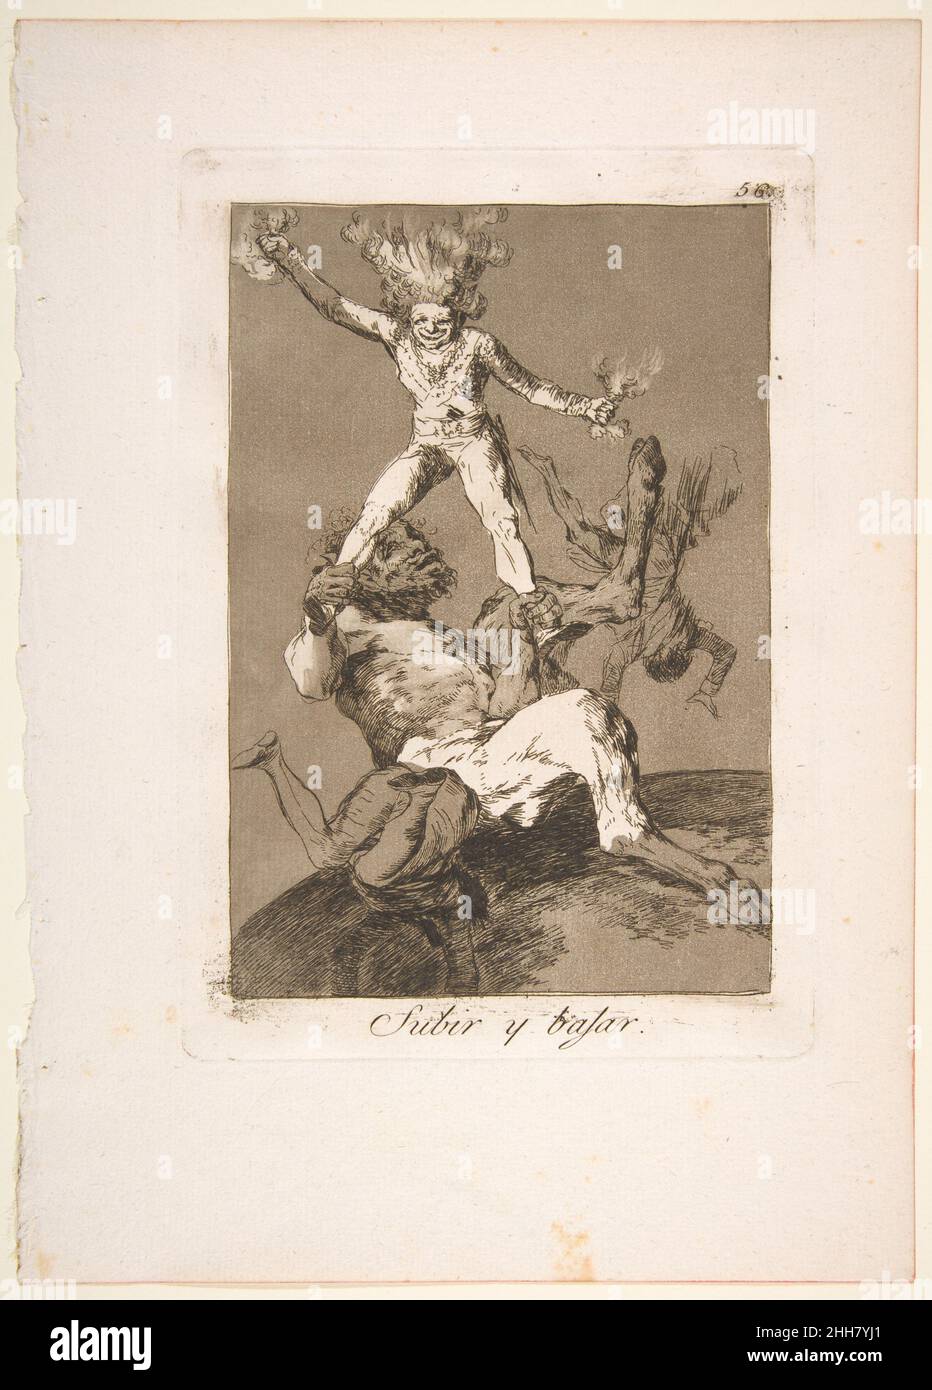 Plate 56 from 'Los Caprichos': To rise and to fall (Subir y bajar.) 1799 Goya (Francisco de Goya y Lucientes) Spanish. Plate 56 from 'Los Caprichos': To rise and to fall (Subir y bajar.)  378033 Artist: Goya (Francisco de Goya y Lucientes), Spanish, Fuendetodos 1746?1828 Bordeaux, Plate 56 from 'Los Caprichos': To rise and to fall (Subir y bajar.), 1799, etching and burnished aquatint, Plate: 8 7/16 x 5 7/8 in. (21.4 x 14.9 cm) Sheet: 11 5/8 ? 8 5/16 in. (29.5 ? 21.1 cm). The Metropolitan Museum of Art, New York. Gift of M. Knoedler & Co., 1918 (18.64(56)) Stock Photo